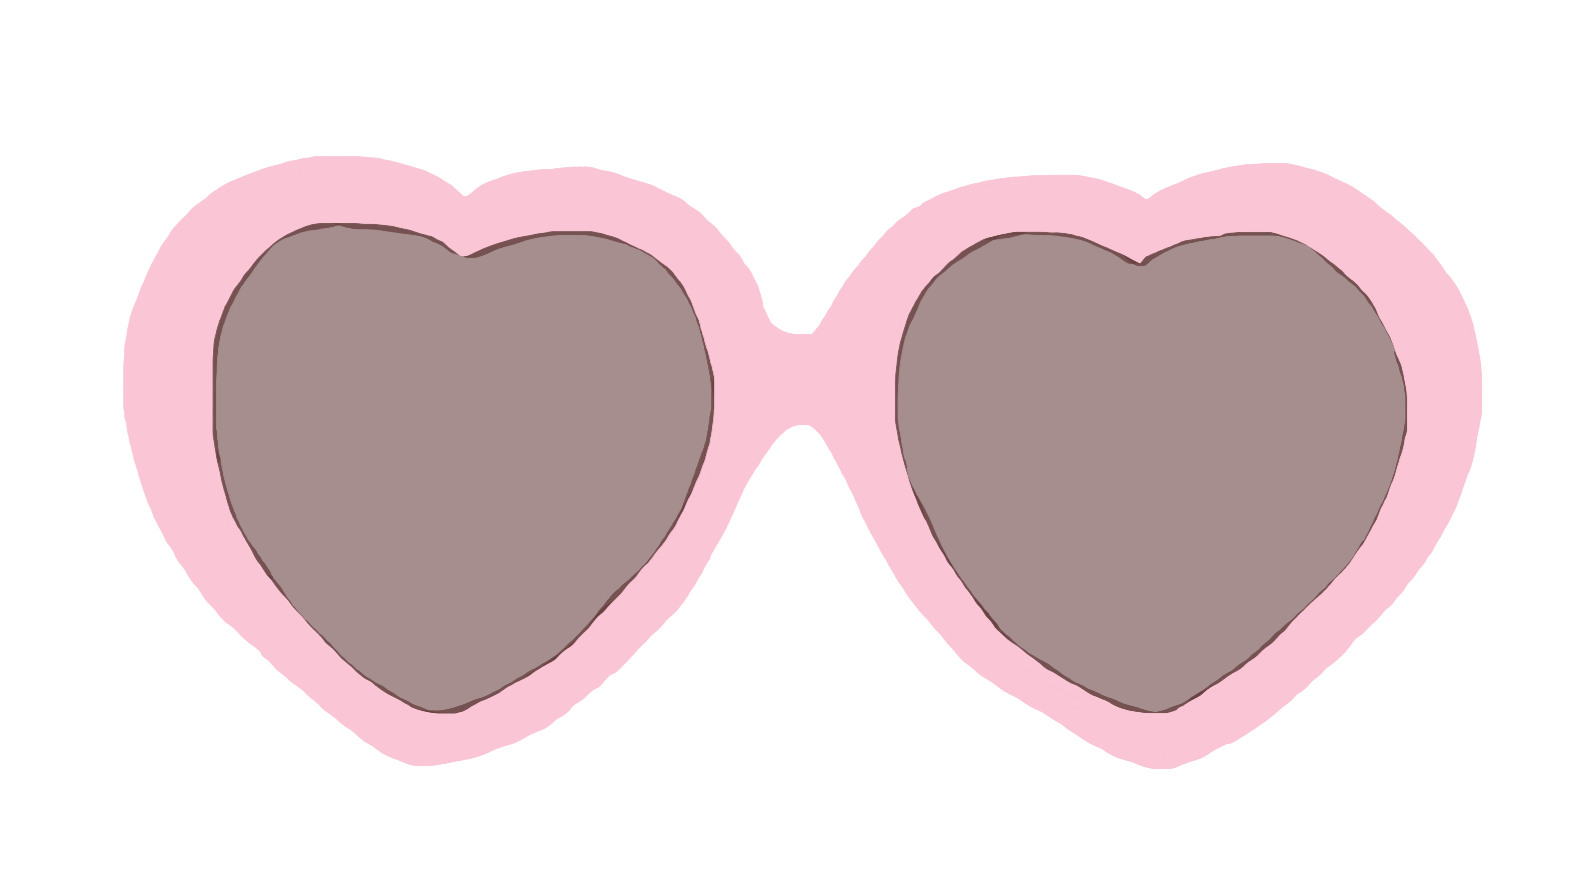 Sunglasses clipart pink heart. Ftestickers report abuse